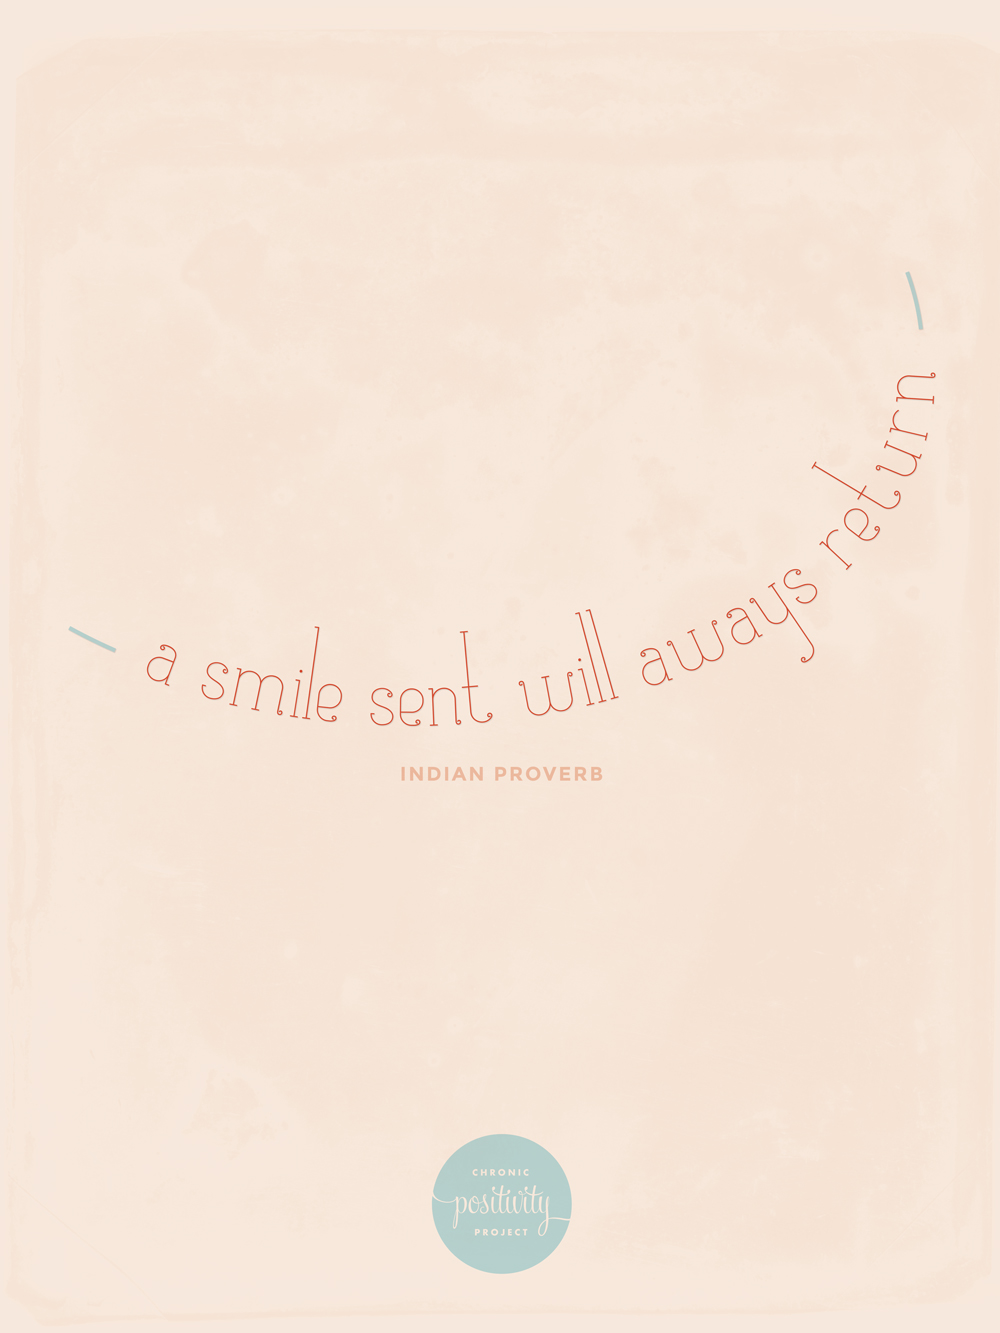 #40: A smile sent will always return - Indian Proverb | Chronic Positivity Project | Inspiration Design by Mary Fran Wiley